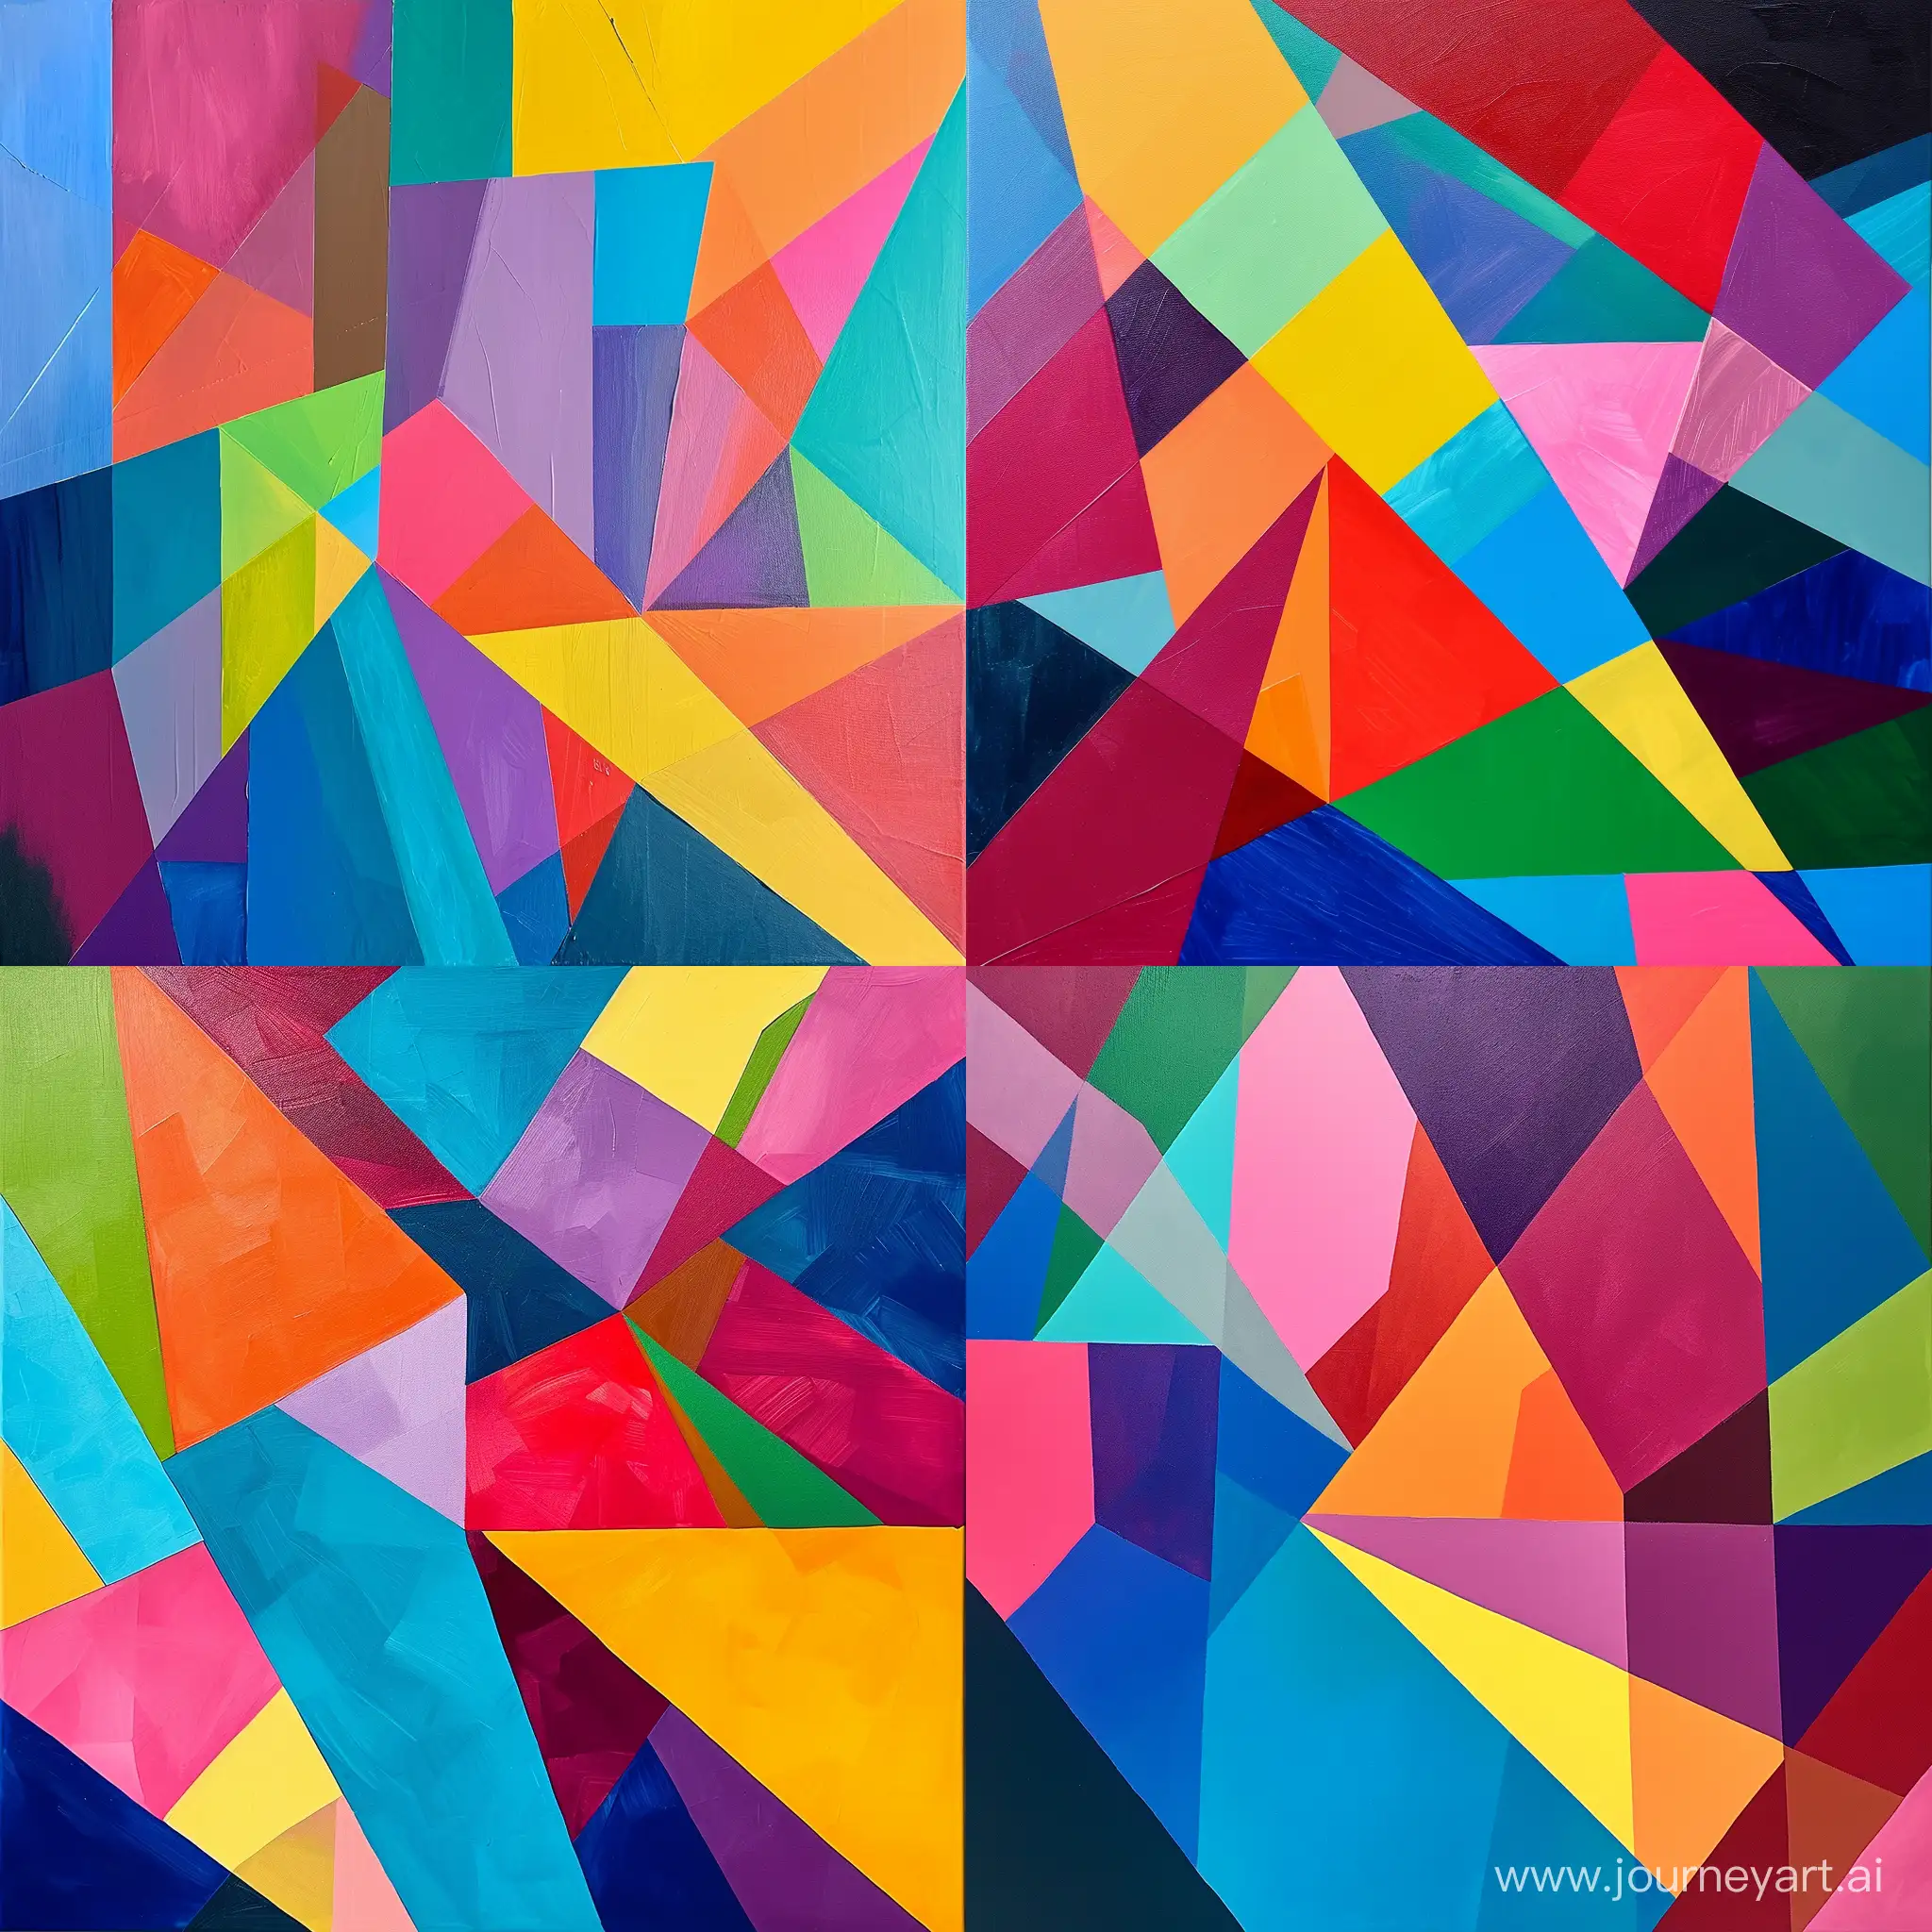 Vibrant-Geometric-Abstract-Painting-with-Playful-Color-Blocks